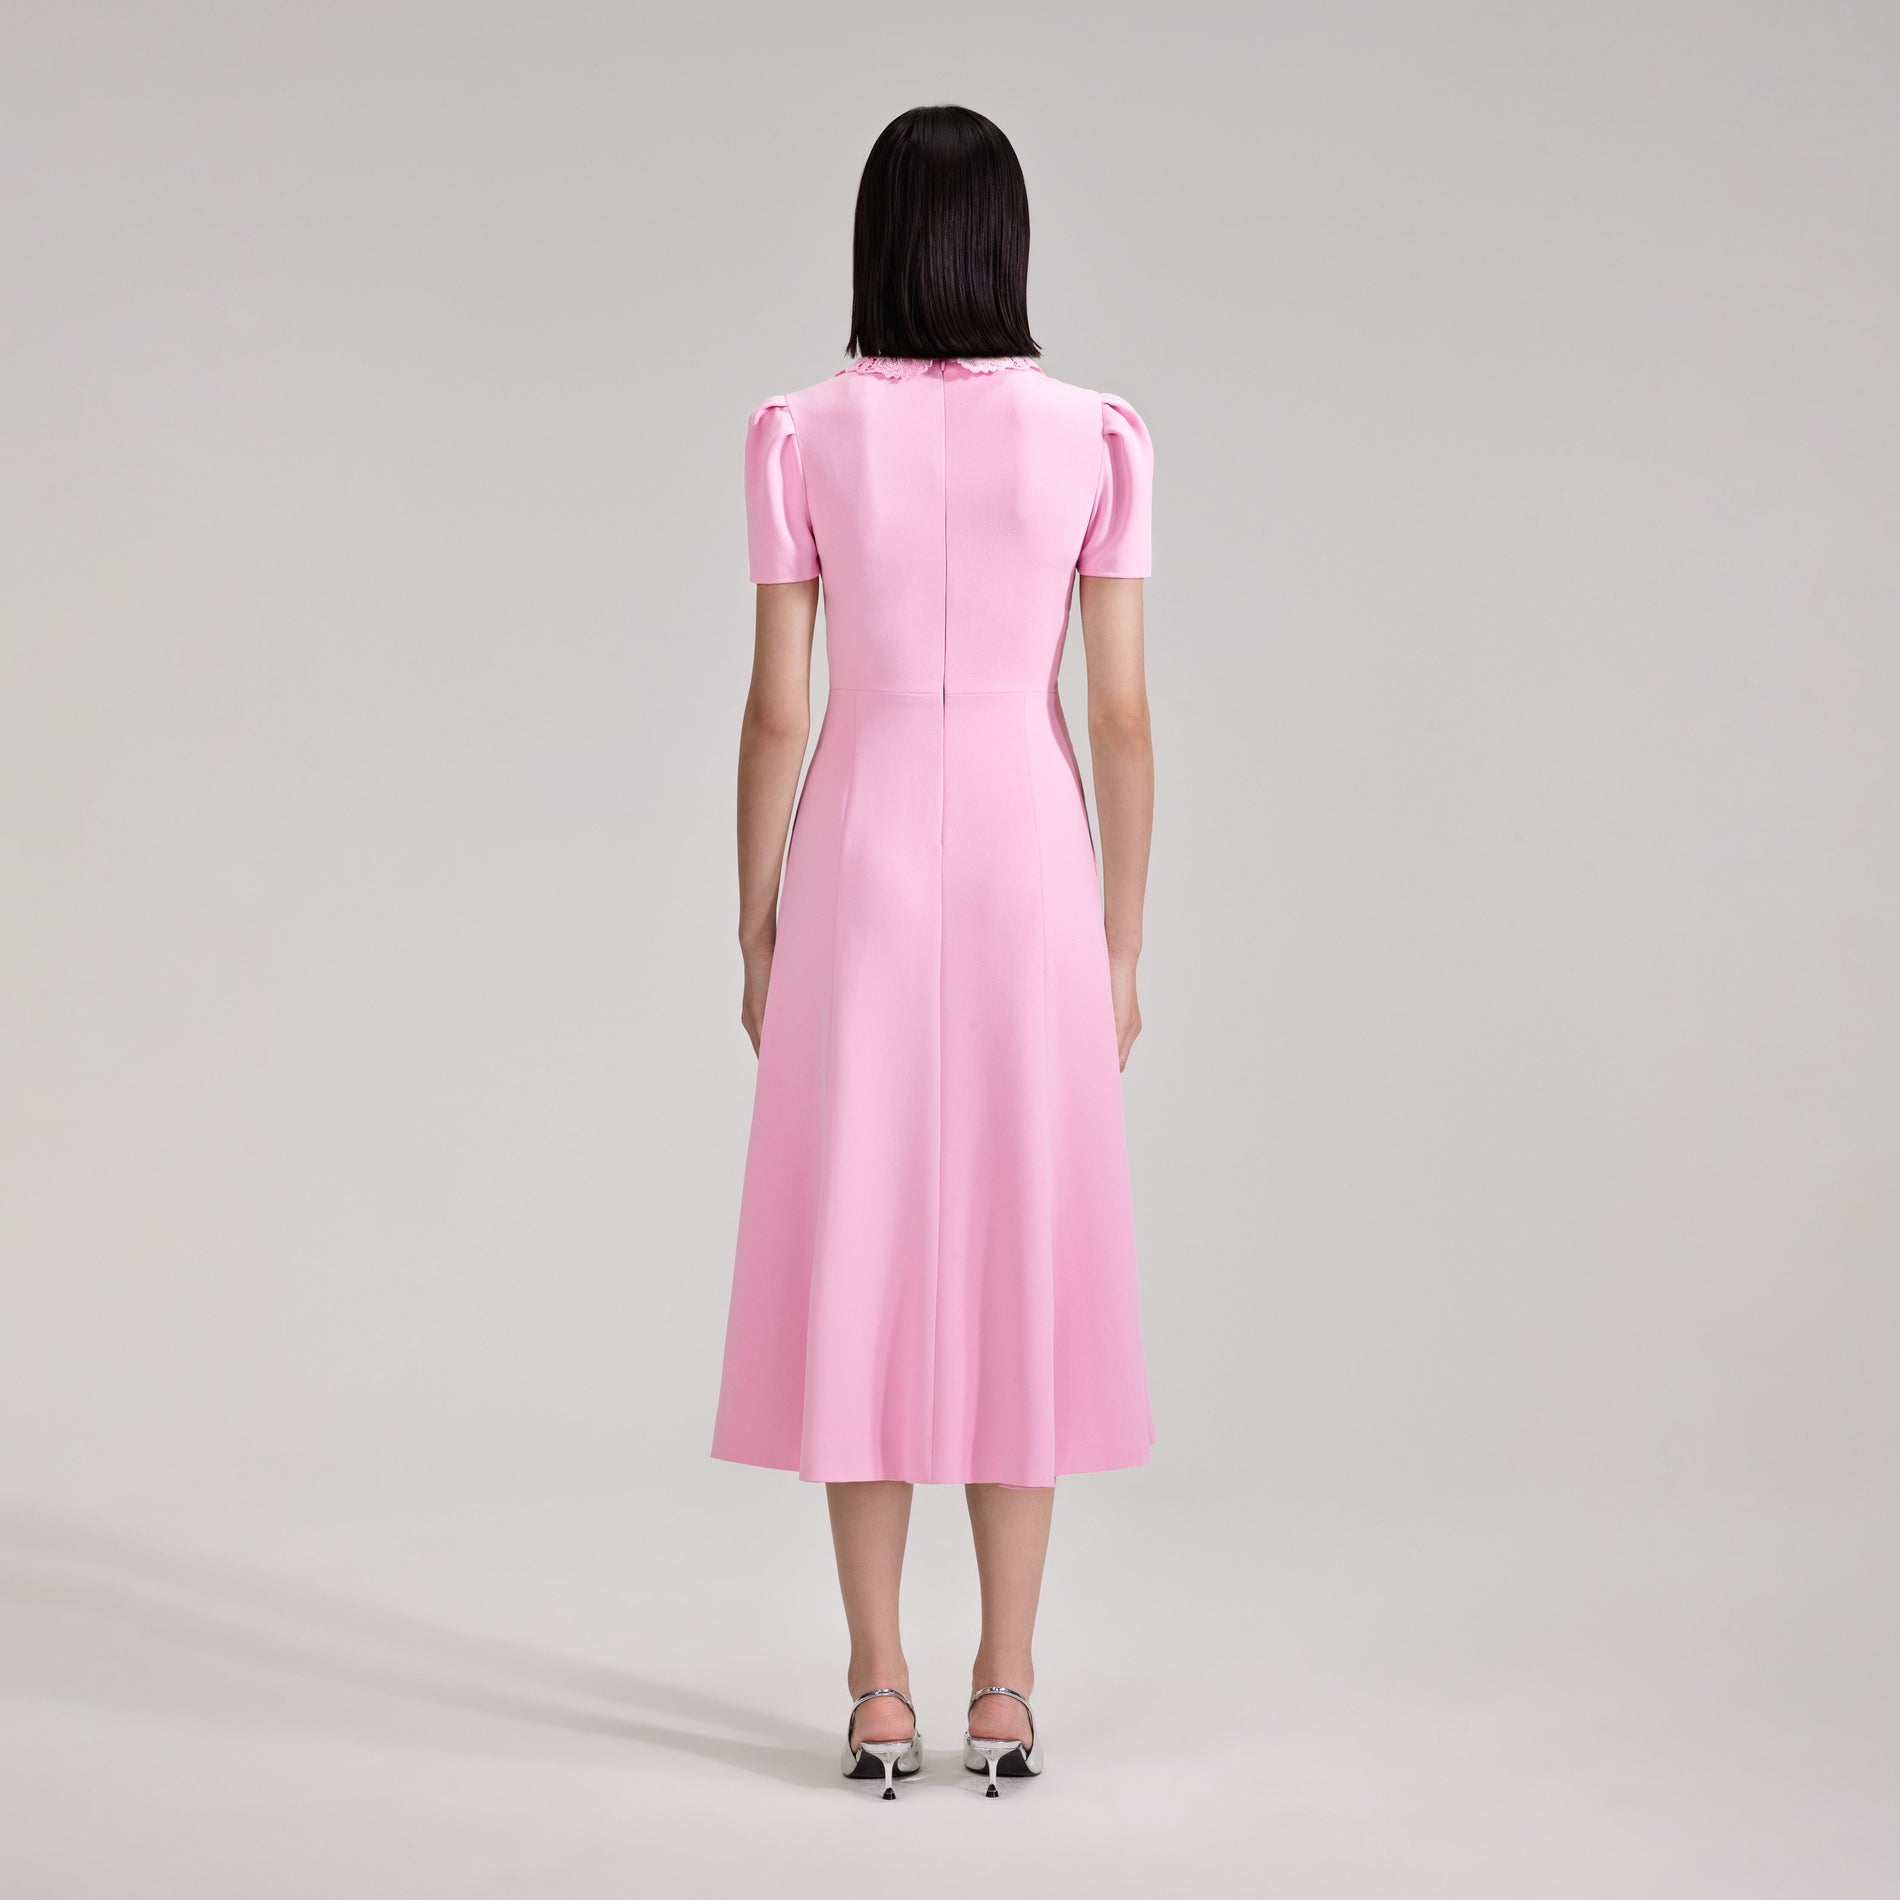 A woman wearing the Pink Heavy Crepe Midi Dress